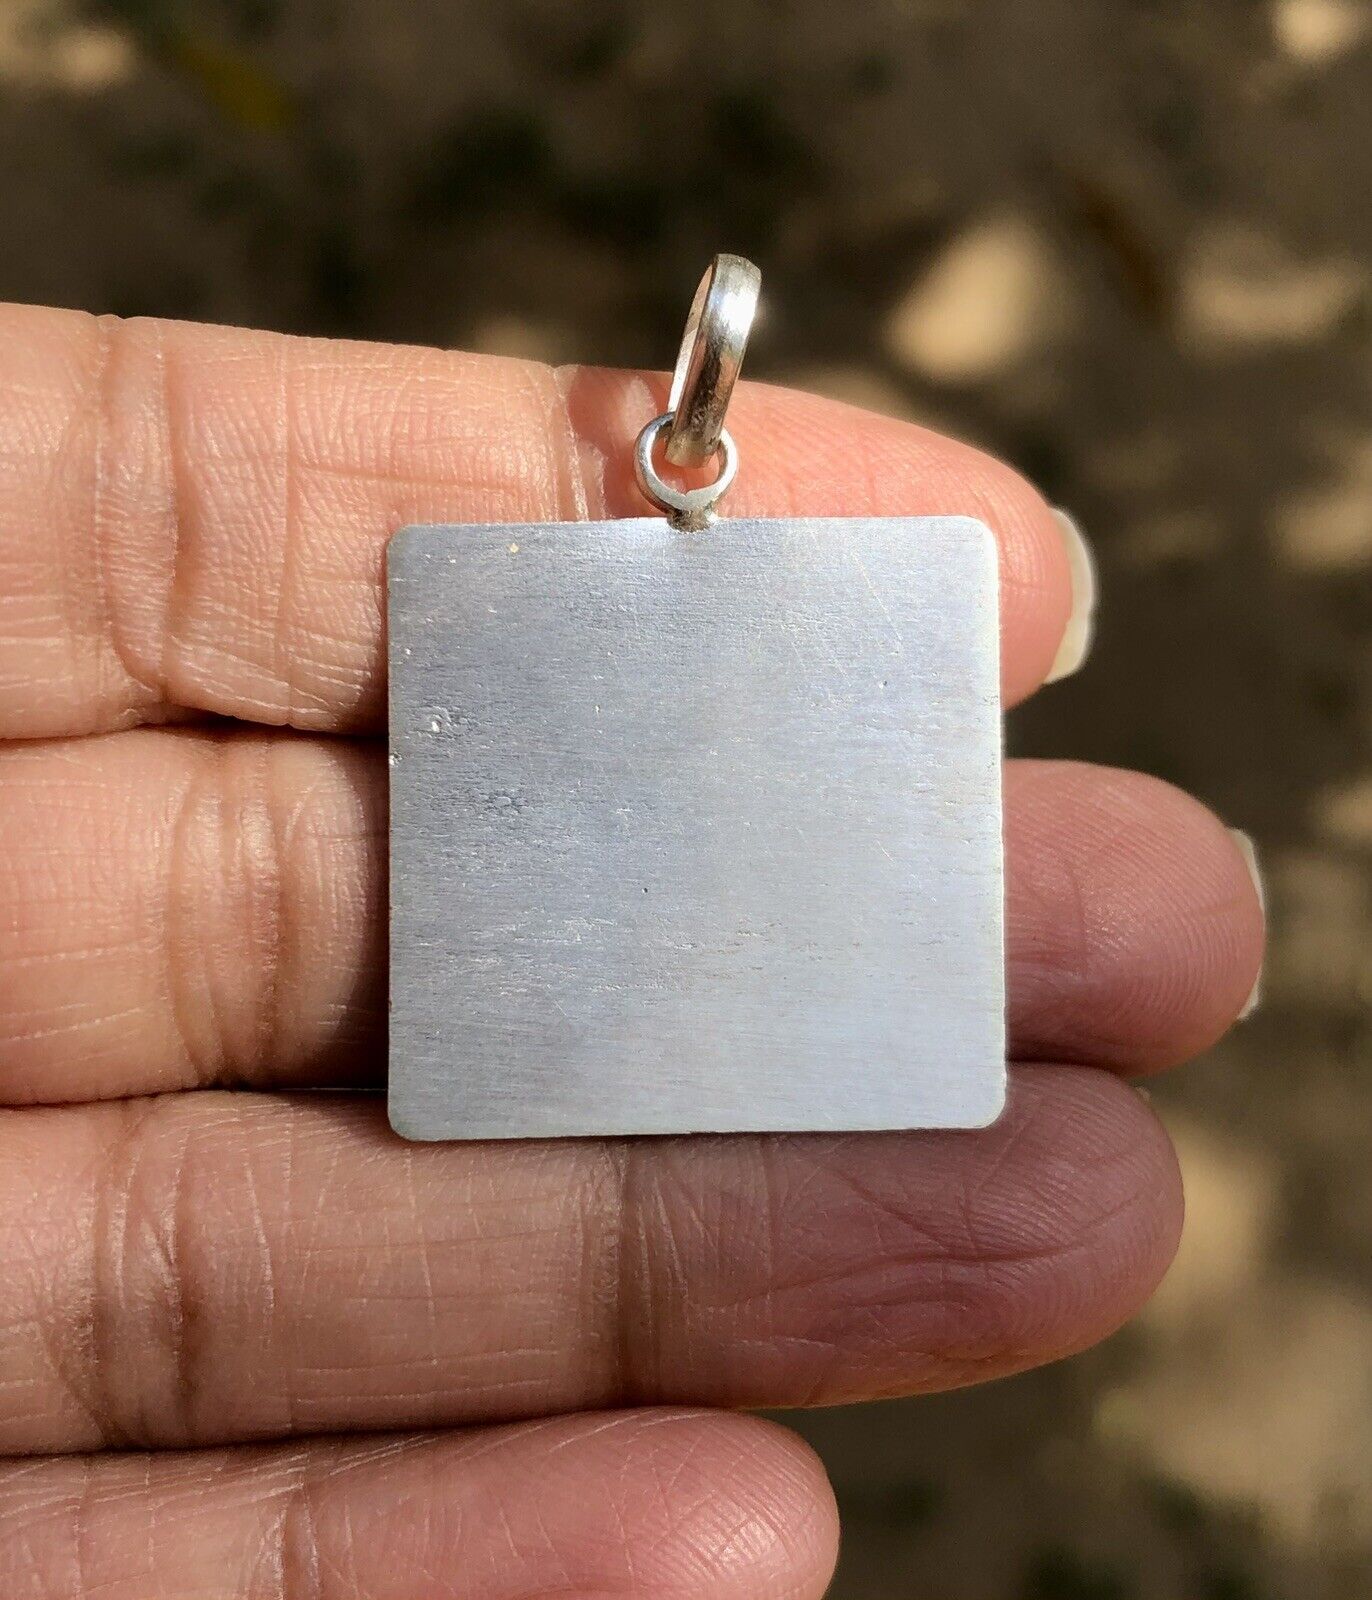 999 Pure Silver Hindu Religious Solid Silver Square Sheet Pendant 1 Pc, 1 inch